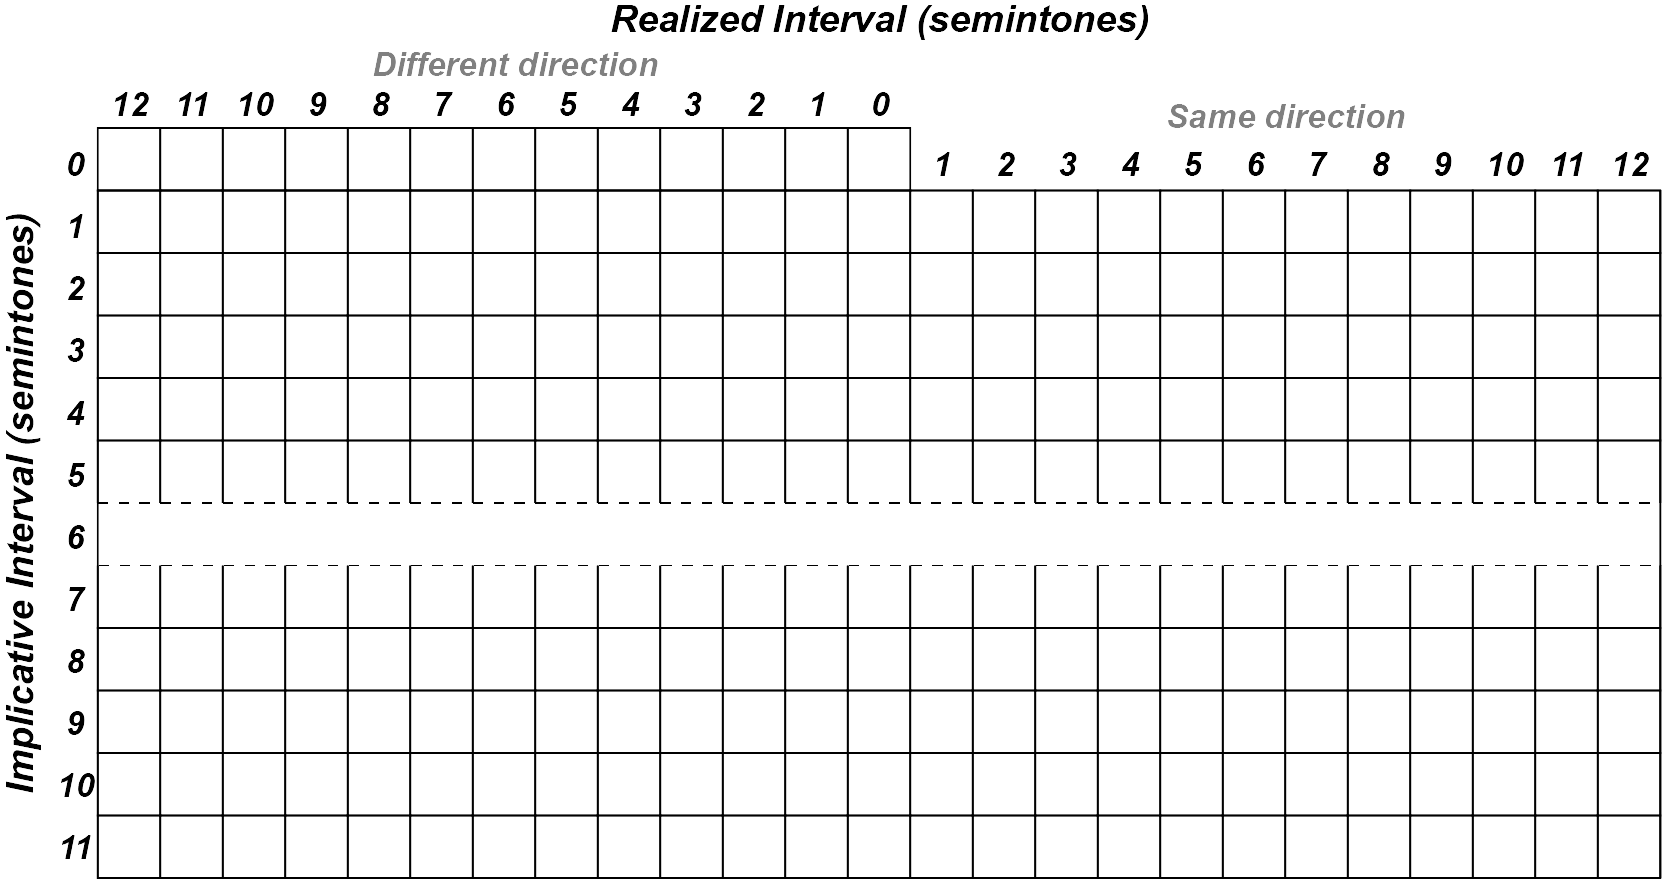 A grid representing possible combinations of implicatove and realized intervals